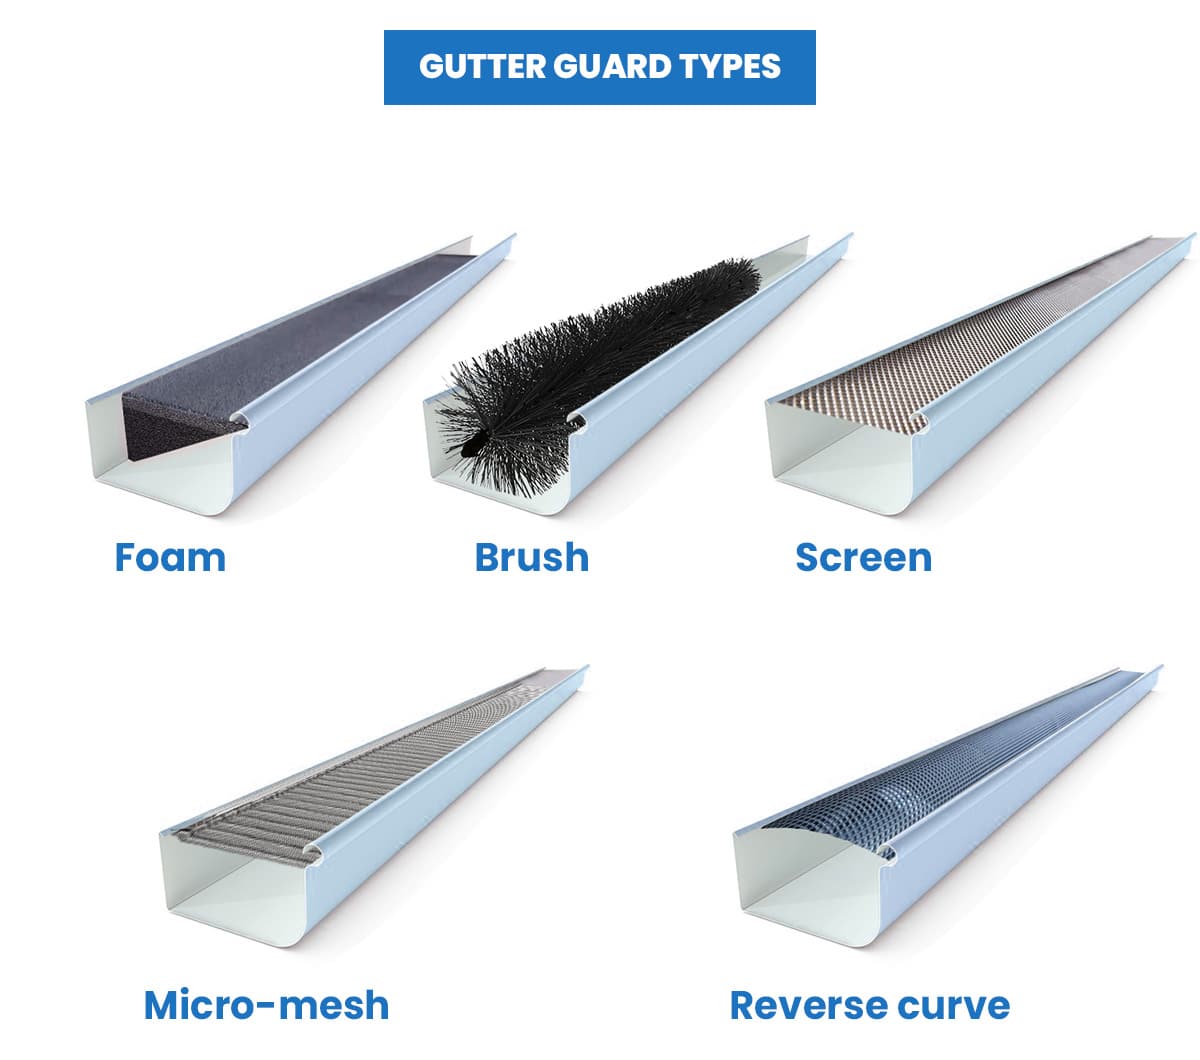 Types of gutter guards